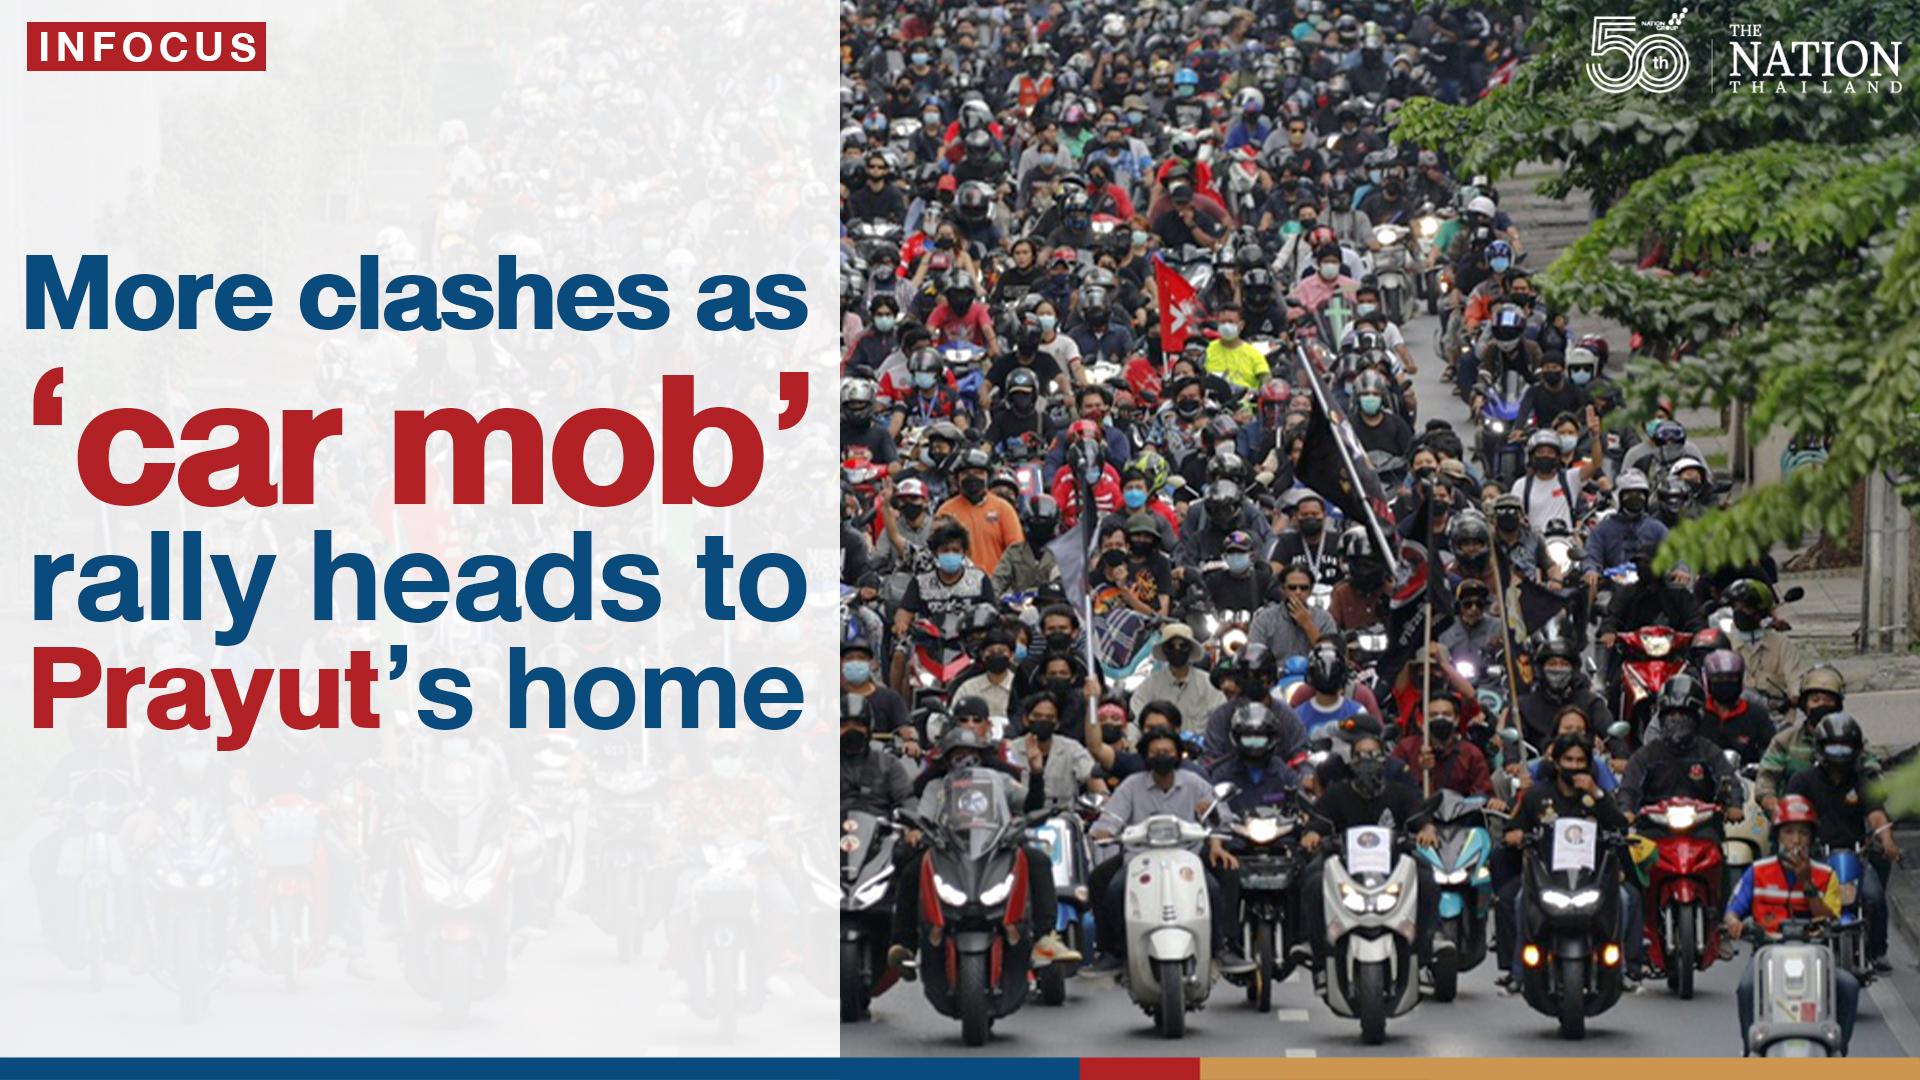 More clashes as ‘car mob’ rally heads to Prayut’s home